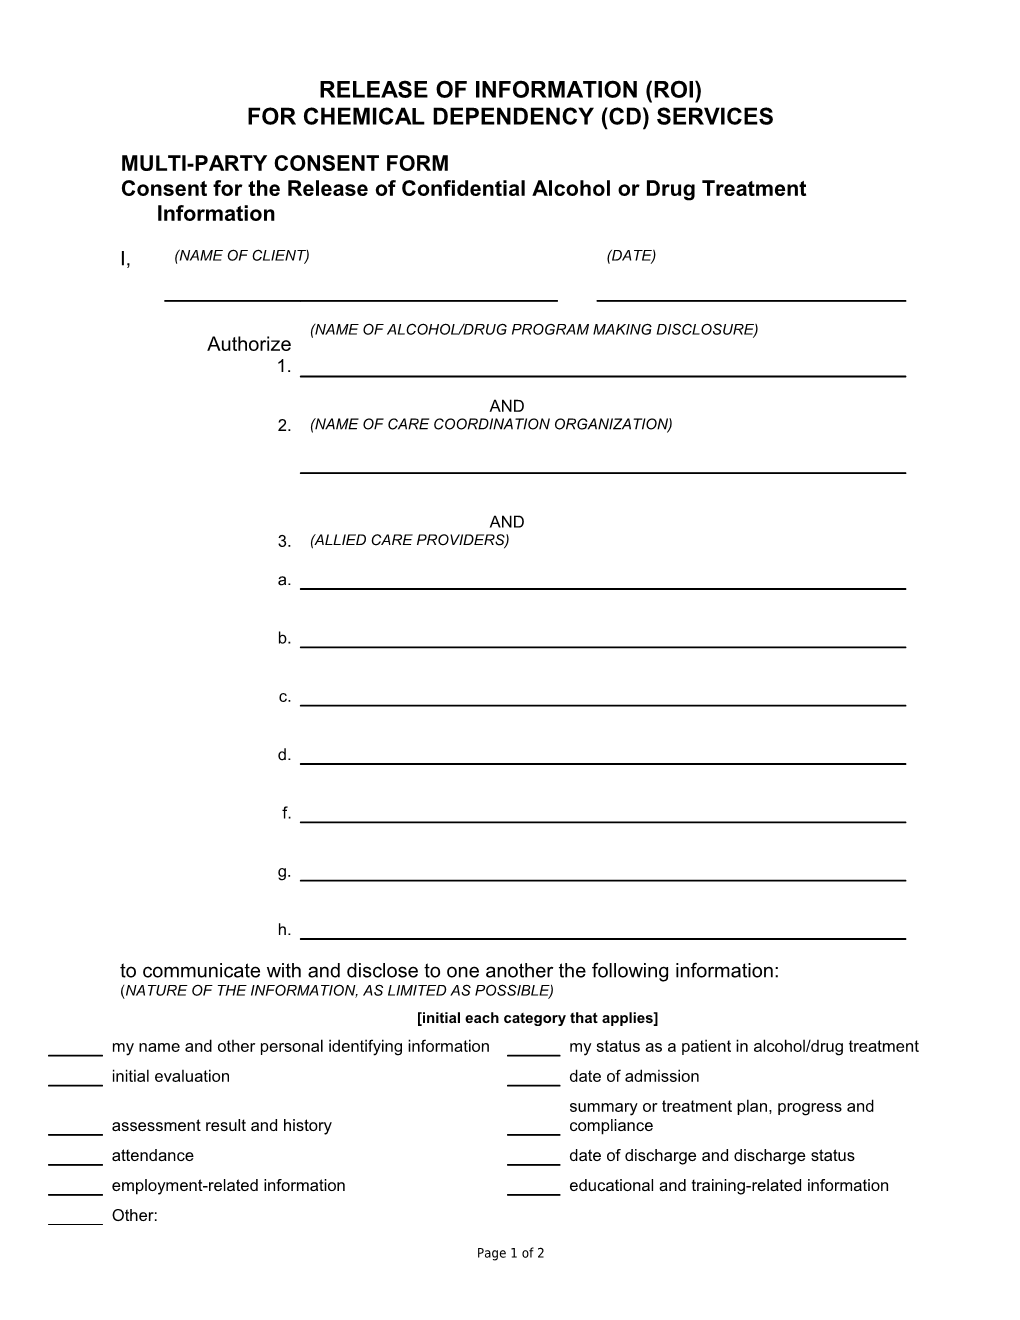 Consent for Release of Confid A/D Tx Info Sample Forms (6)